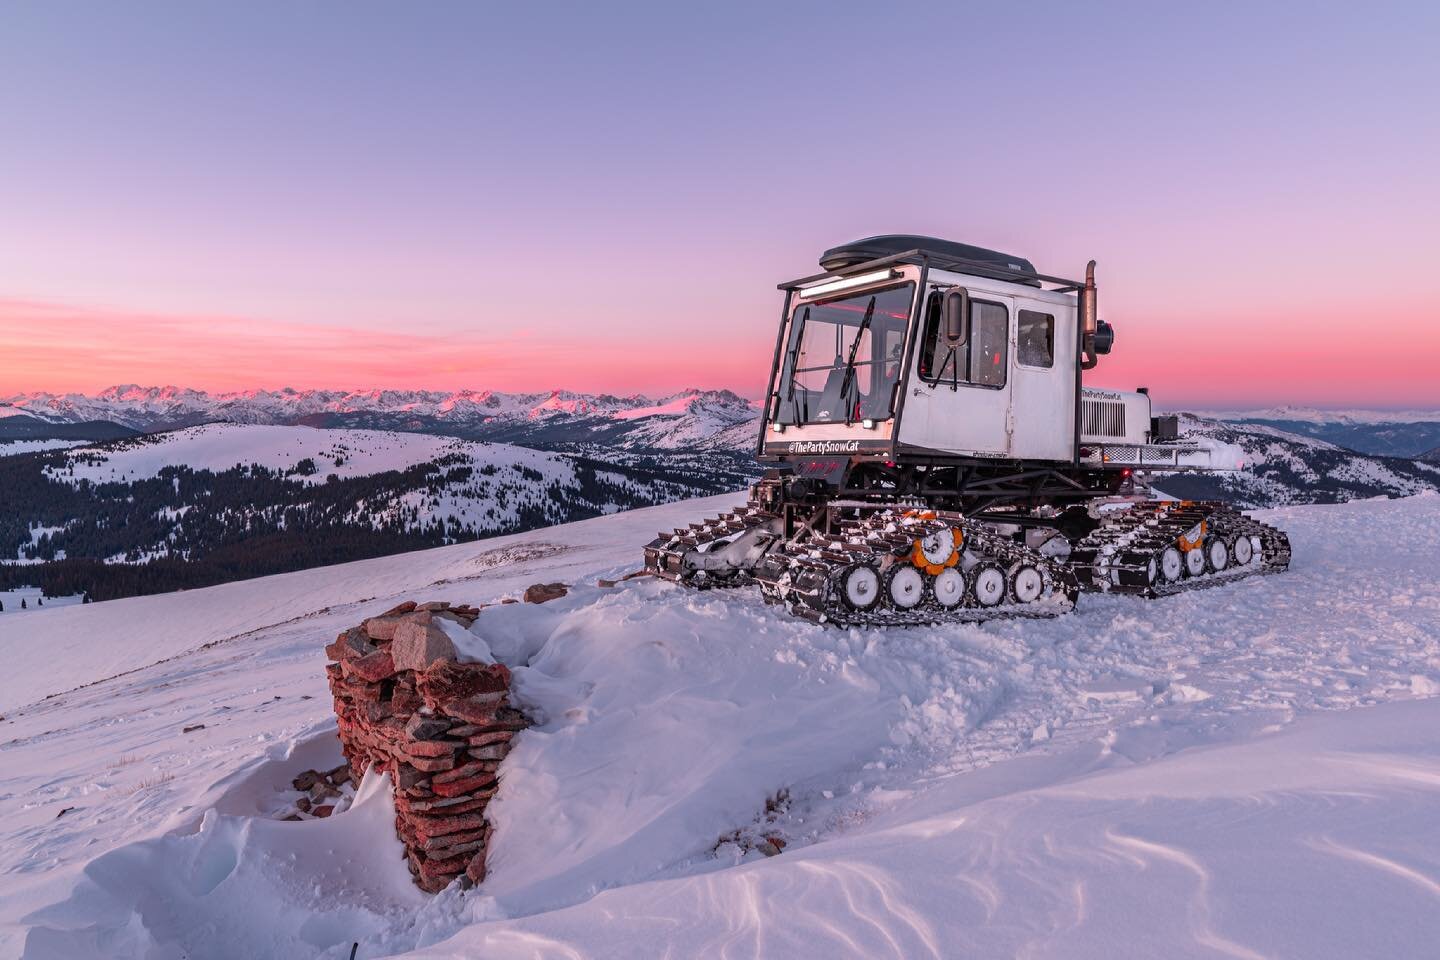 Snowcat sunsets are hard to beat. Huge thanks to @thepartysnowcat for an insane winter. 
-
-
-
- #leavenotrace #bestcoloradophotography #coloradotraveltips #movingtocolorado #coloradountamed #visitcolorado #coloradogram #jj_colorado #coloradoproud #d